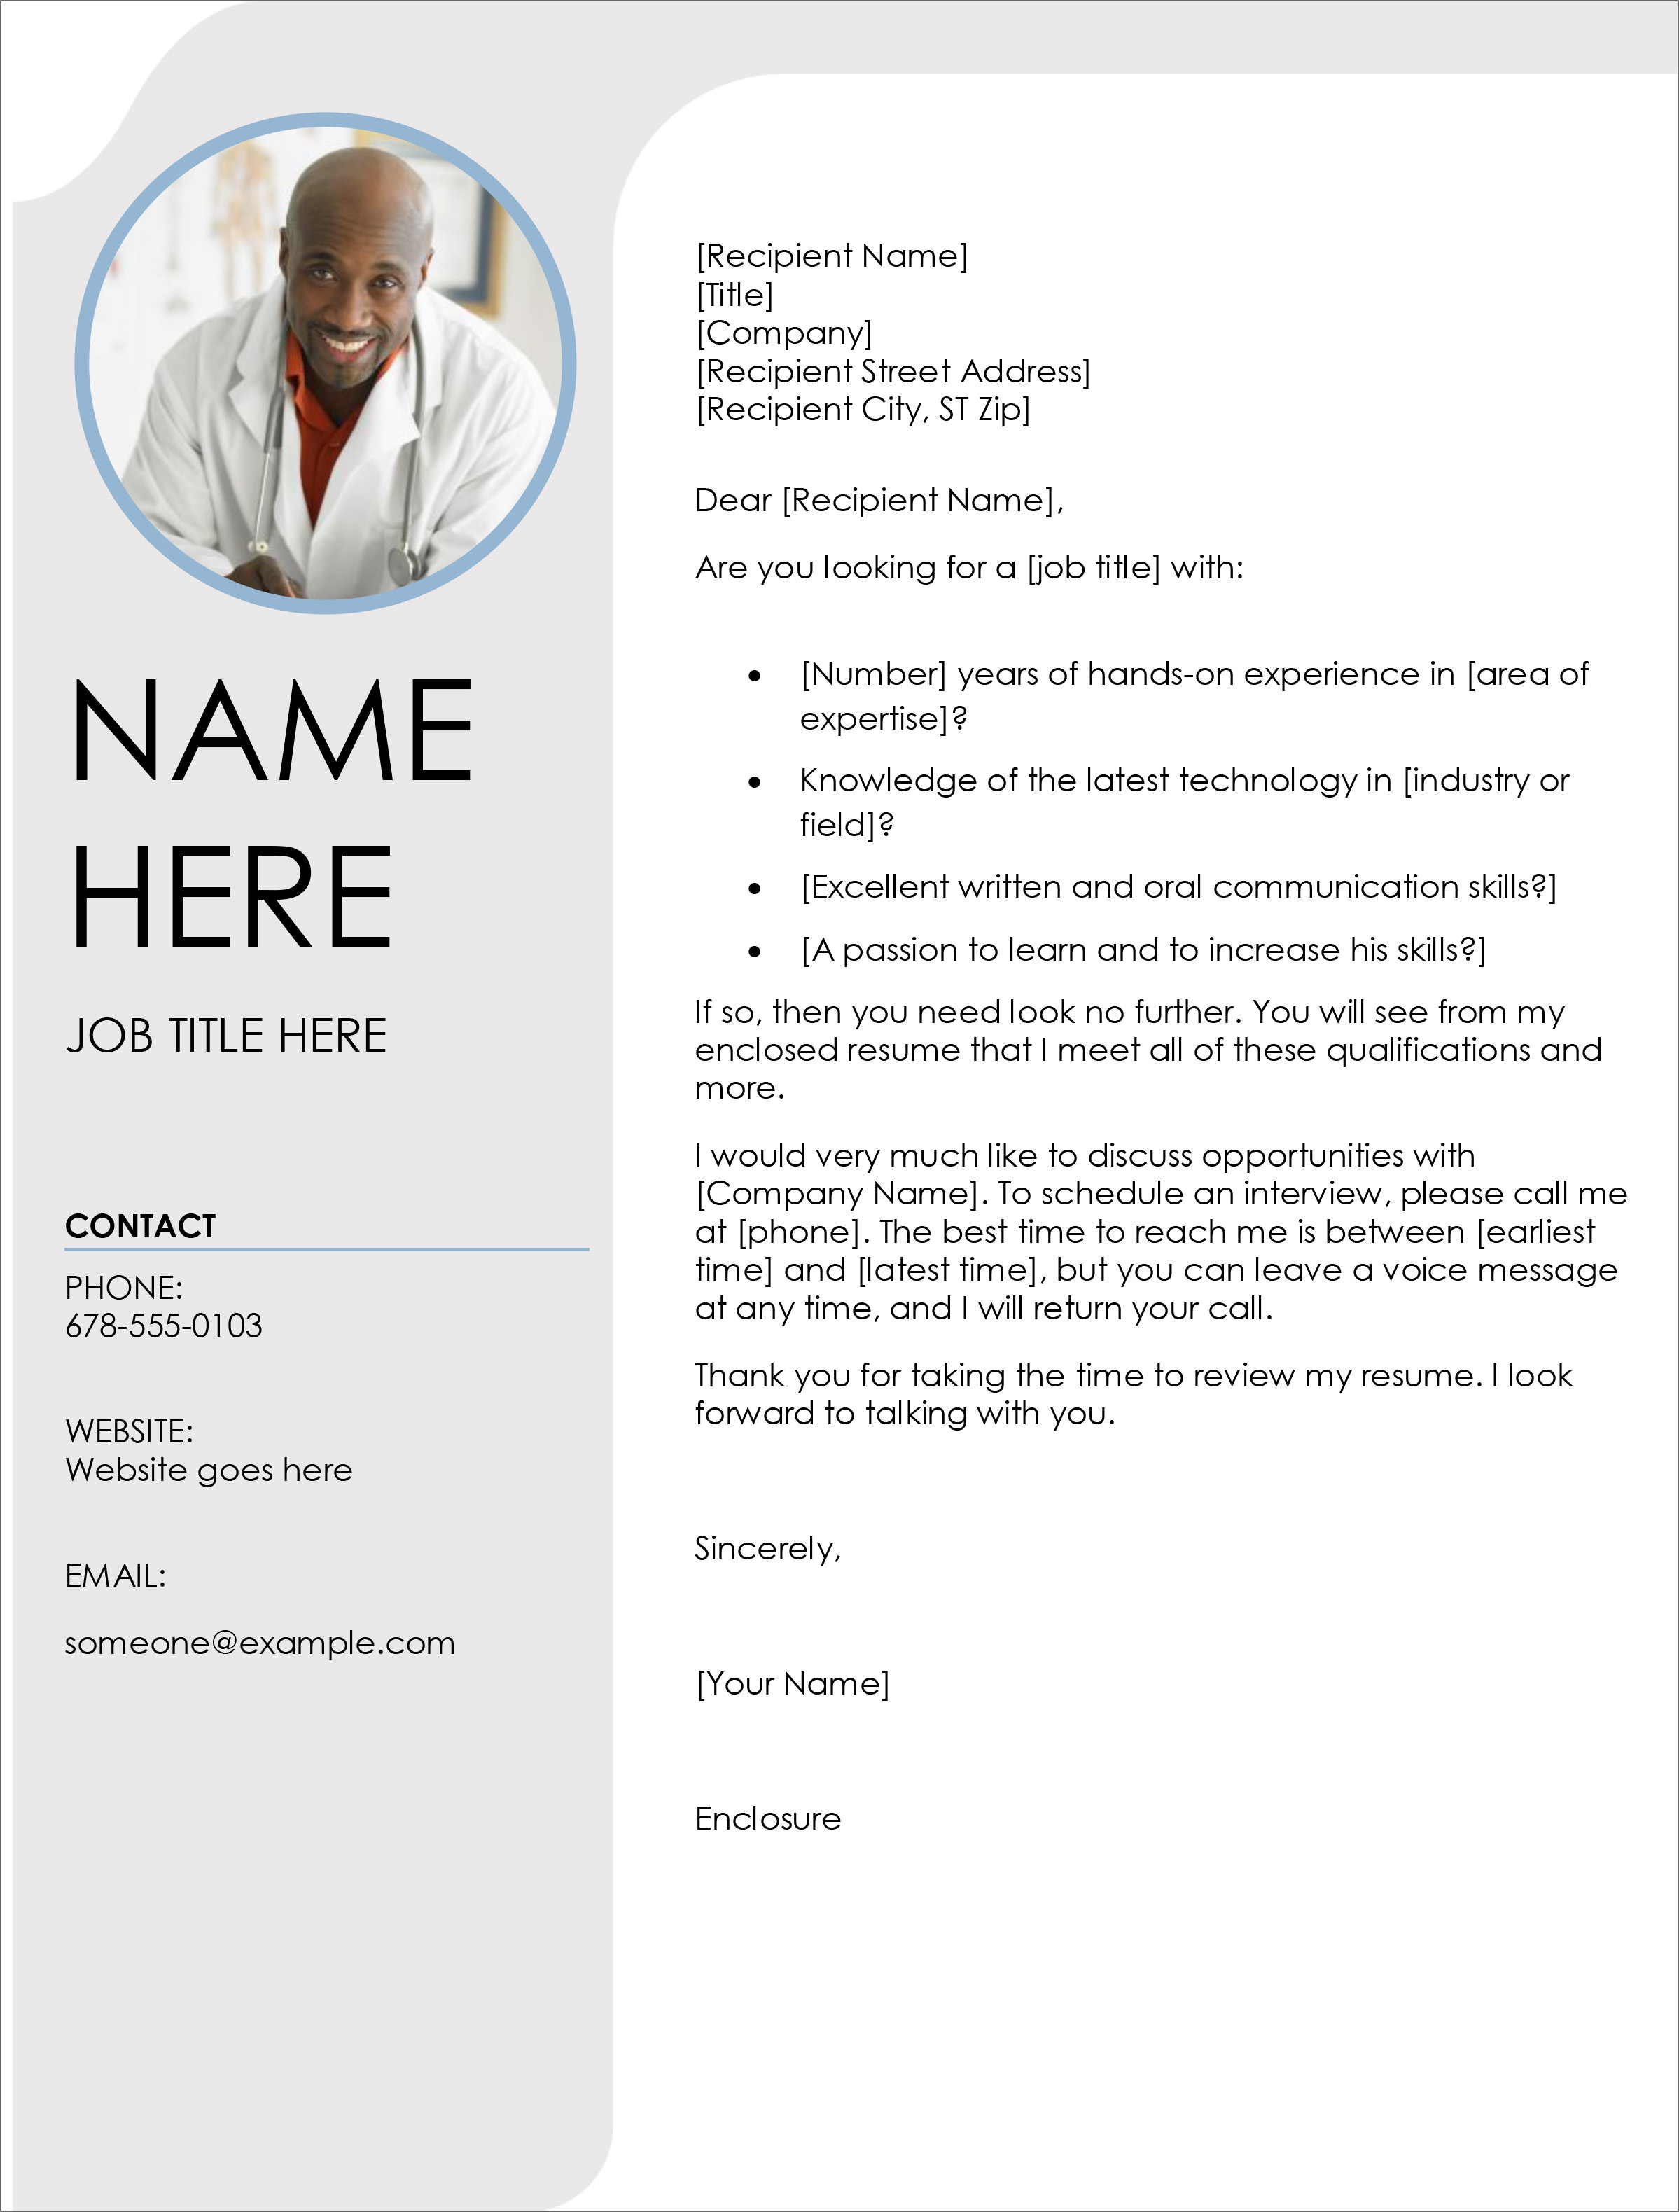 Microsoft Word Cover Letter Templates Database | Letter Template Collection